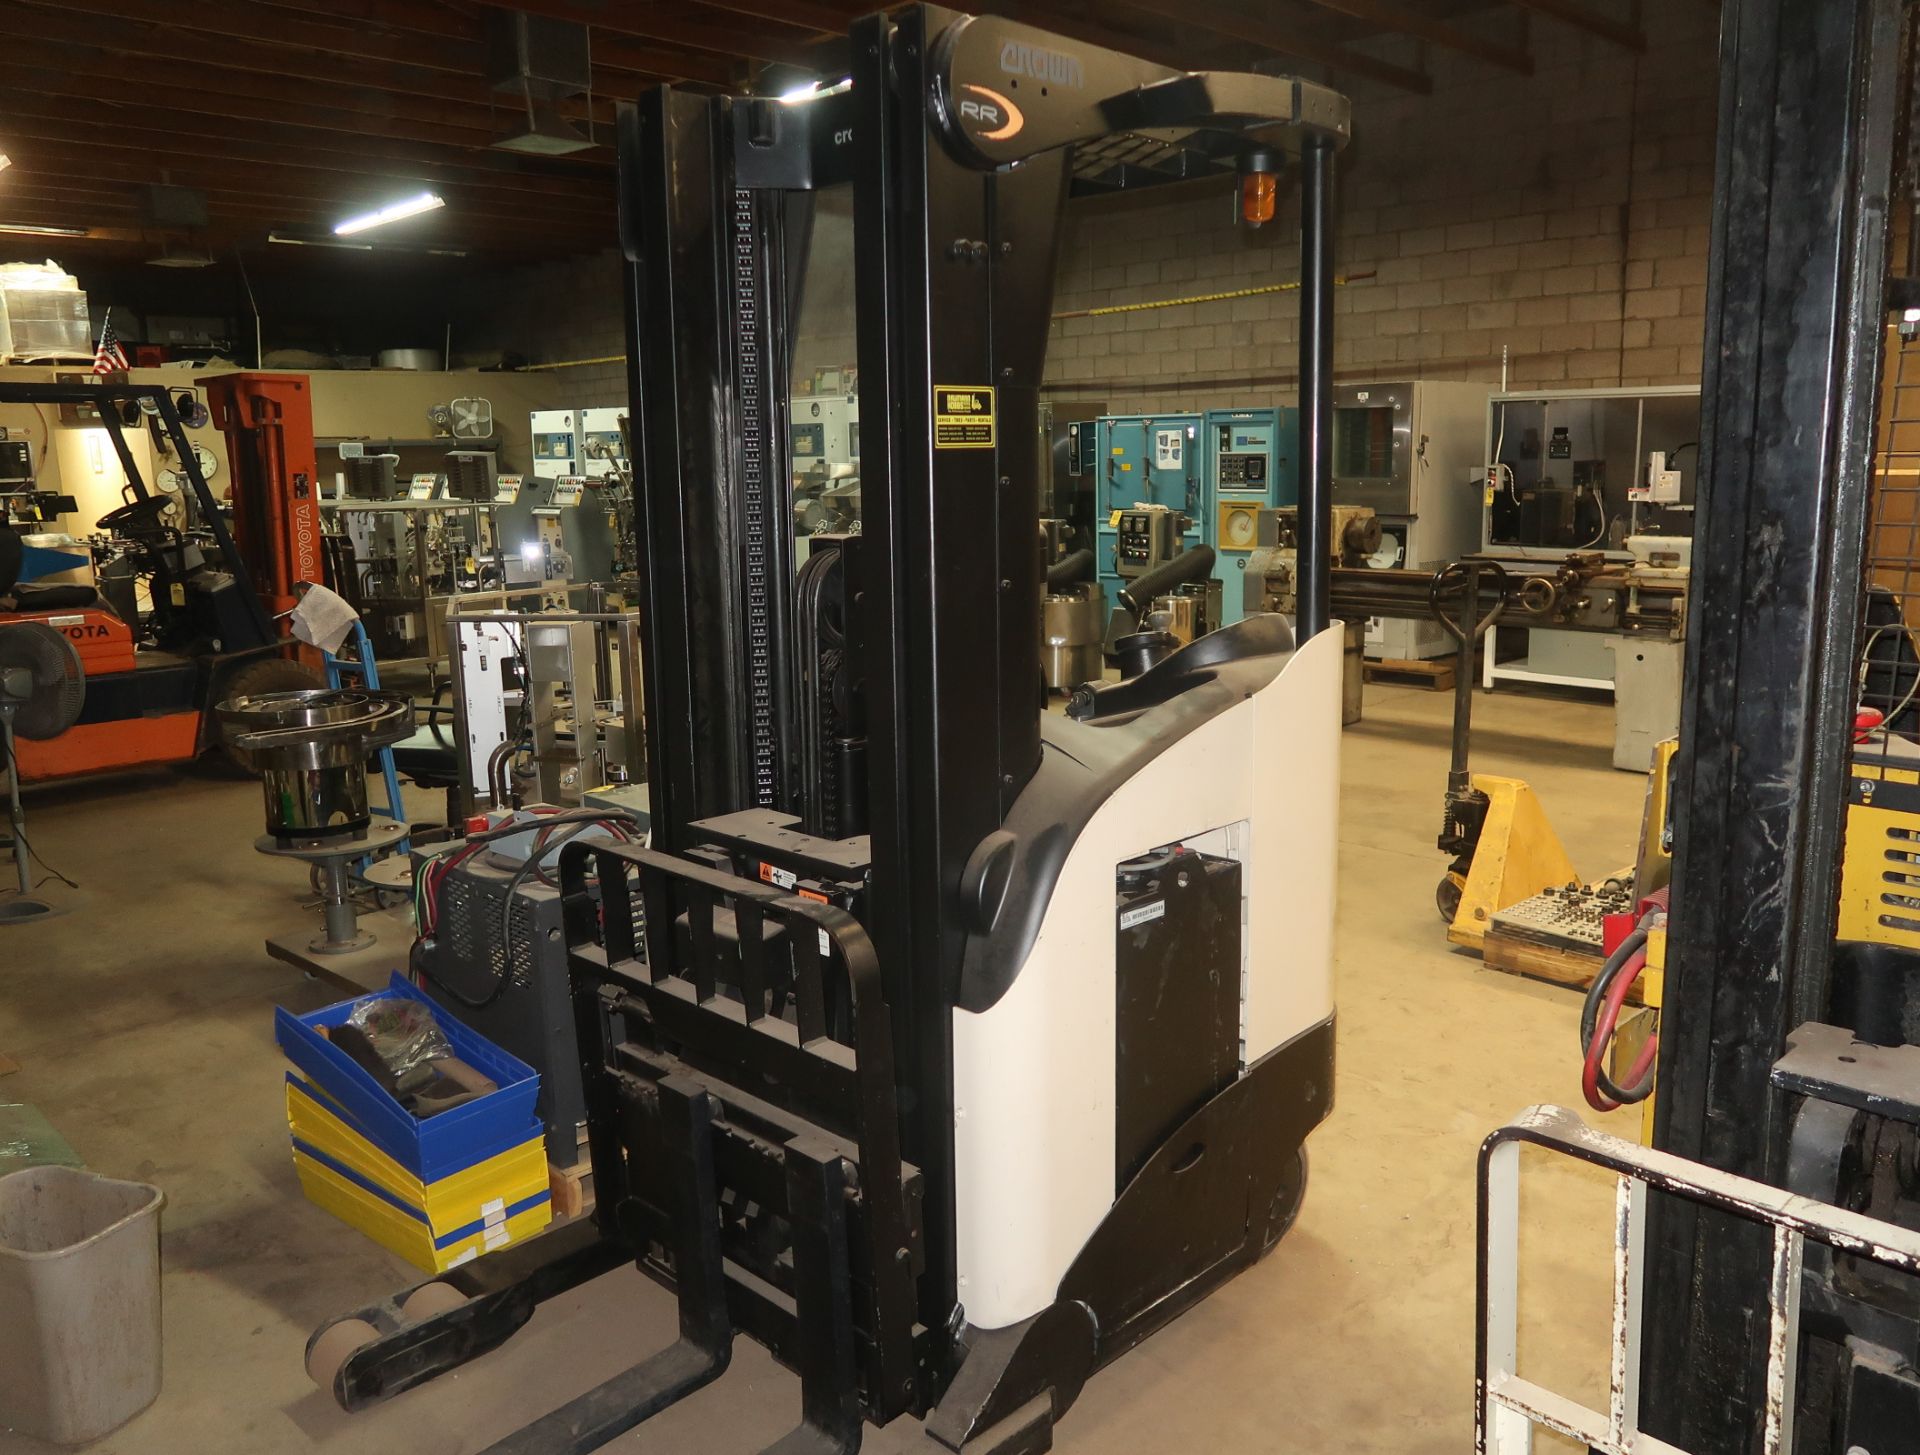 CROWN RR5200 SERIES NARROW AISLE REACH LIFT, ELECTRIC FORKLIFT 3.5' FORKS, 4000LB CAP. DUAL MAST - Image 5 of 12